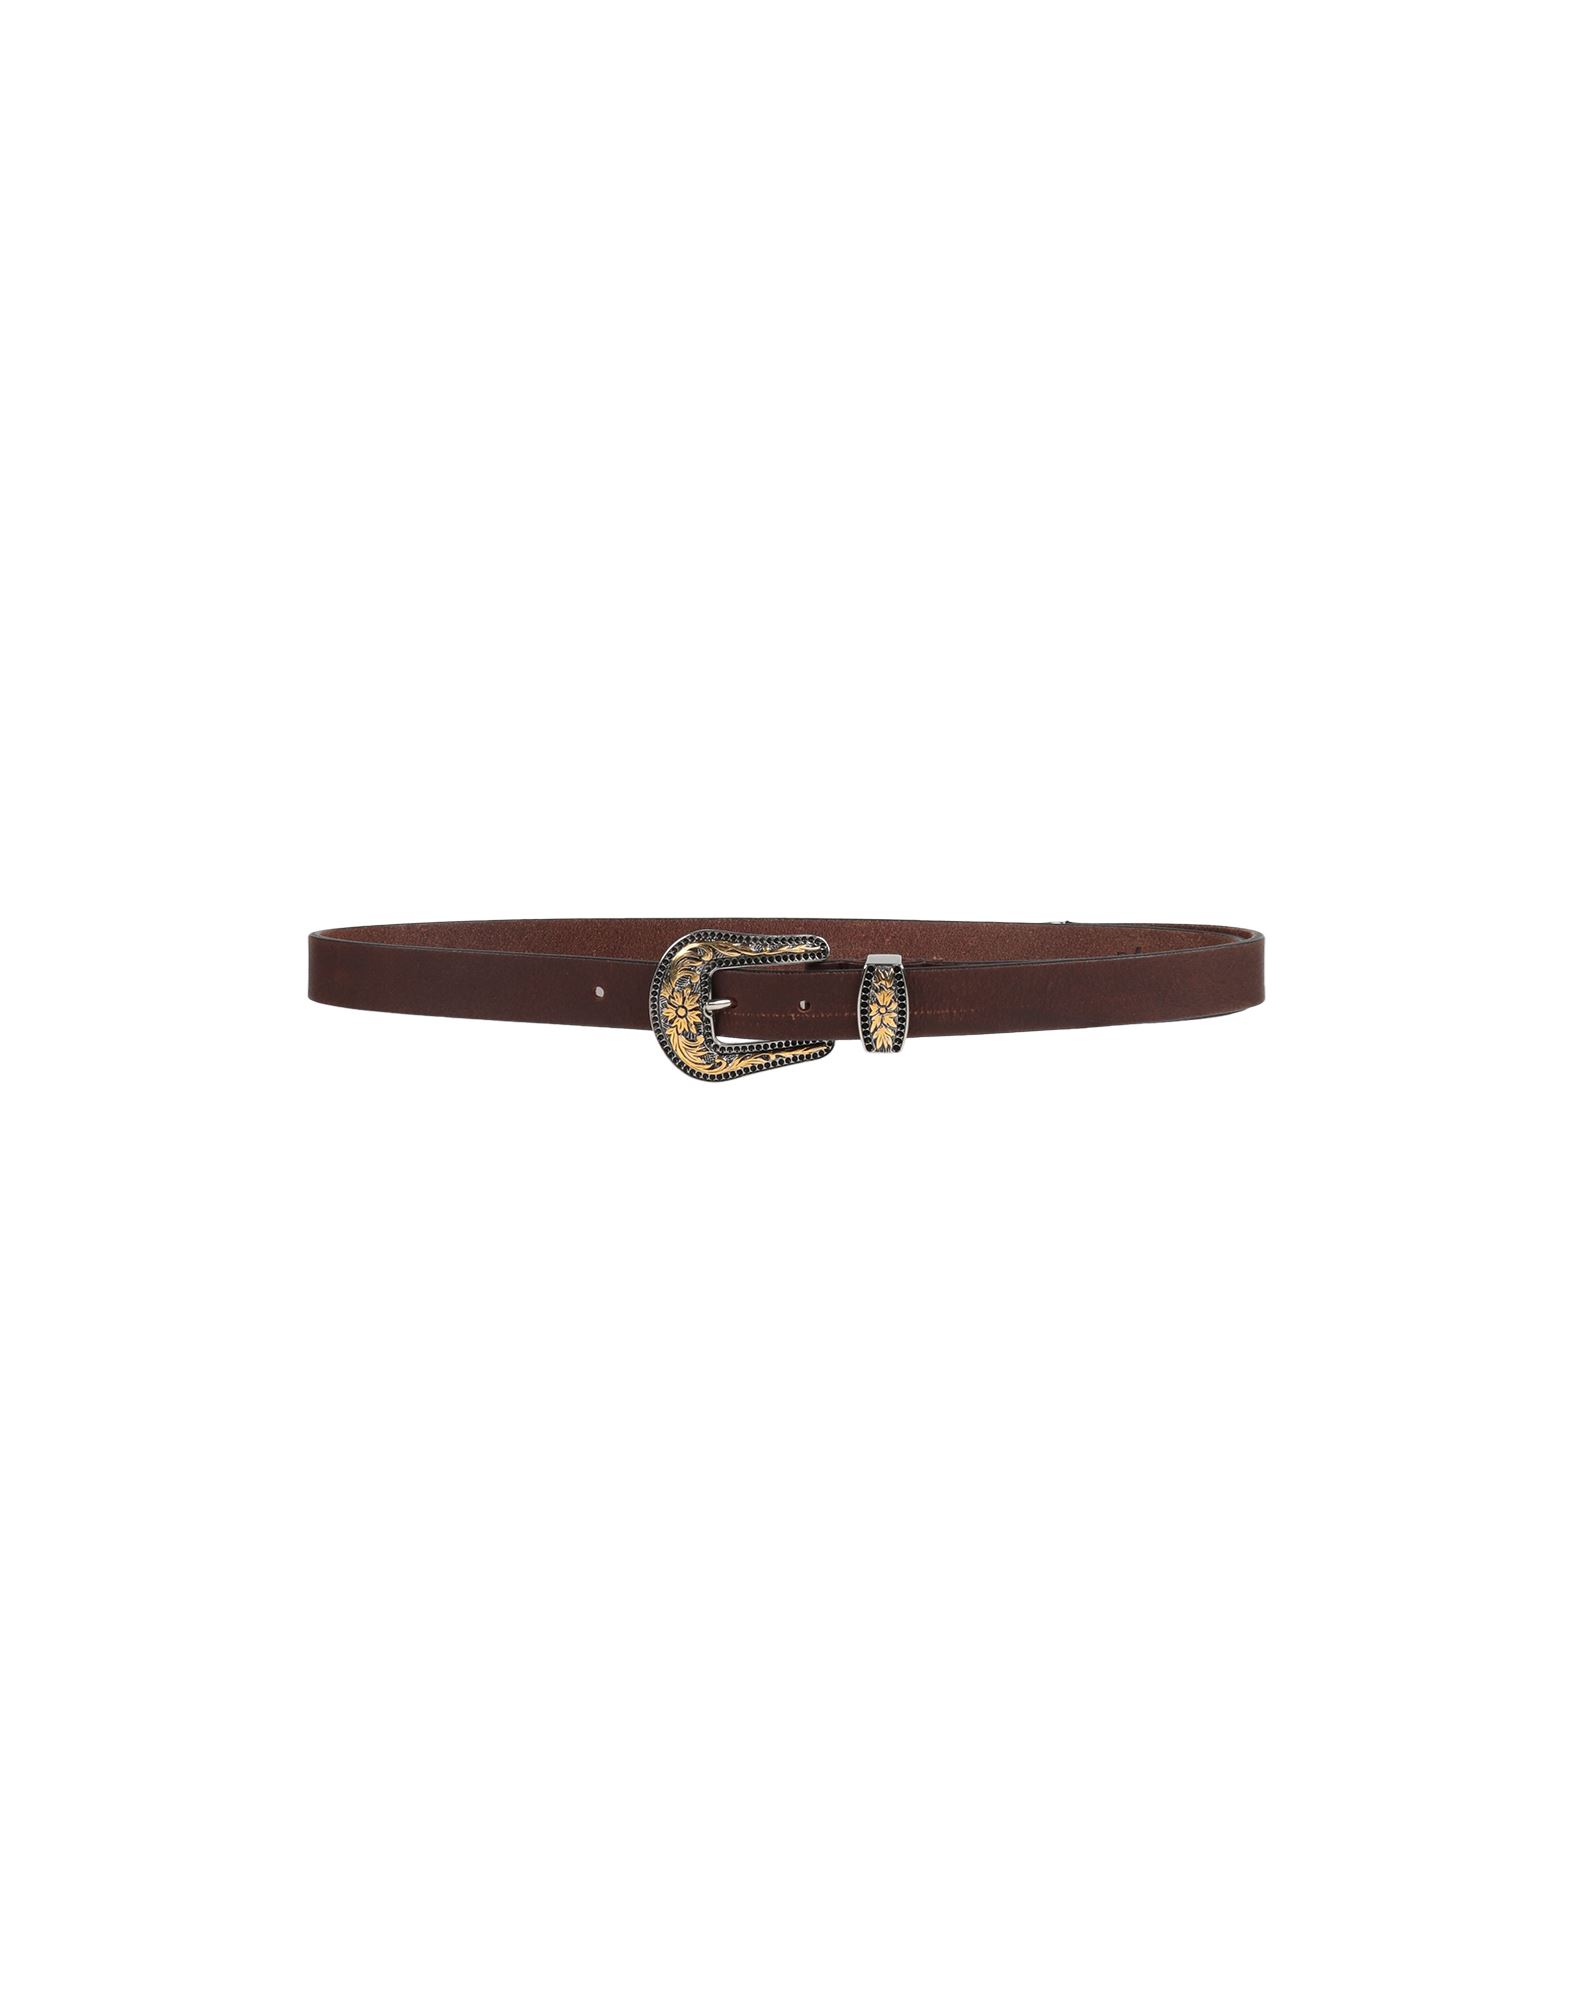 Andrea D'amico Belts In Brown